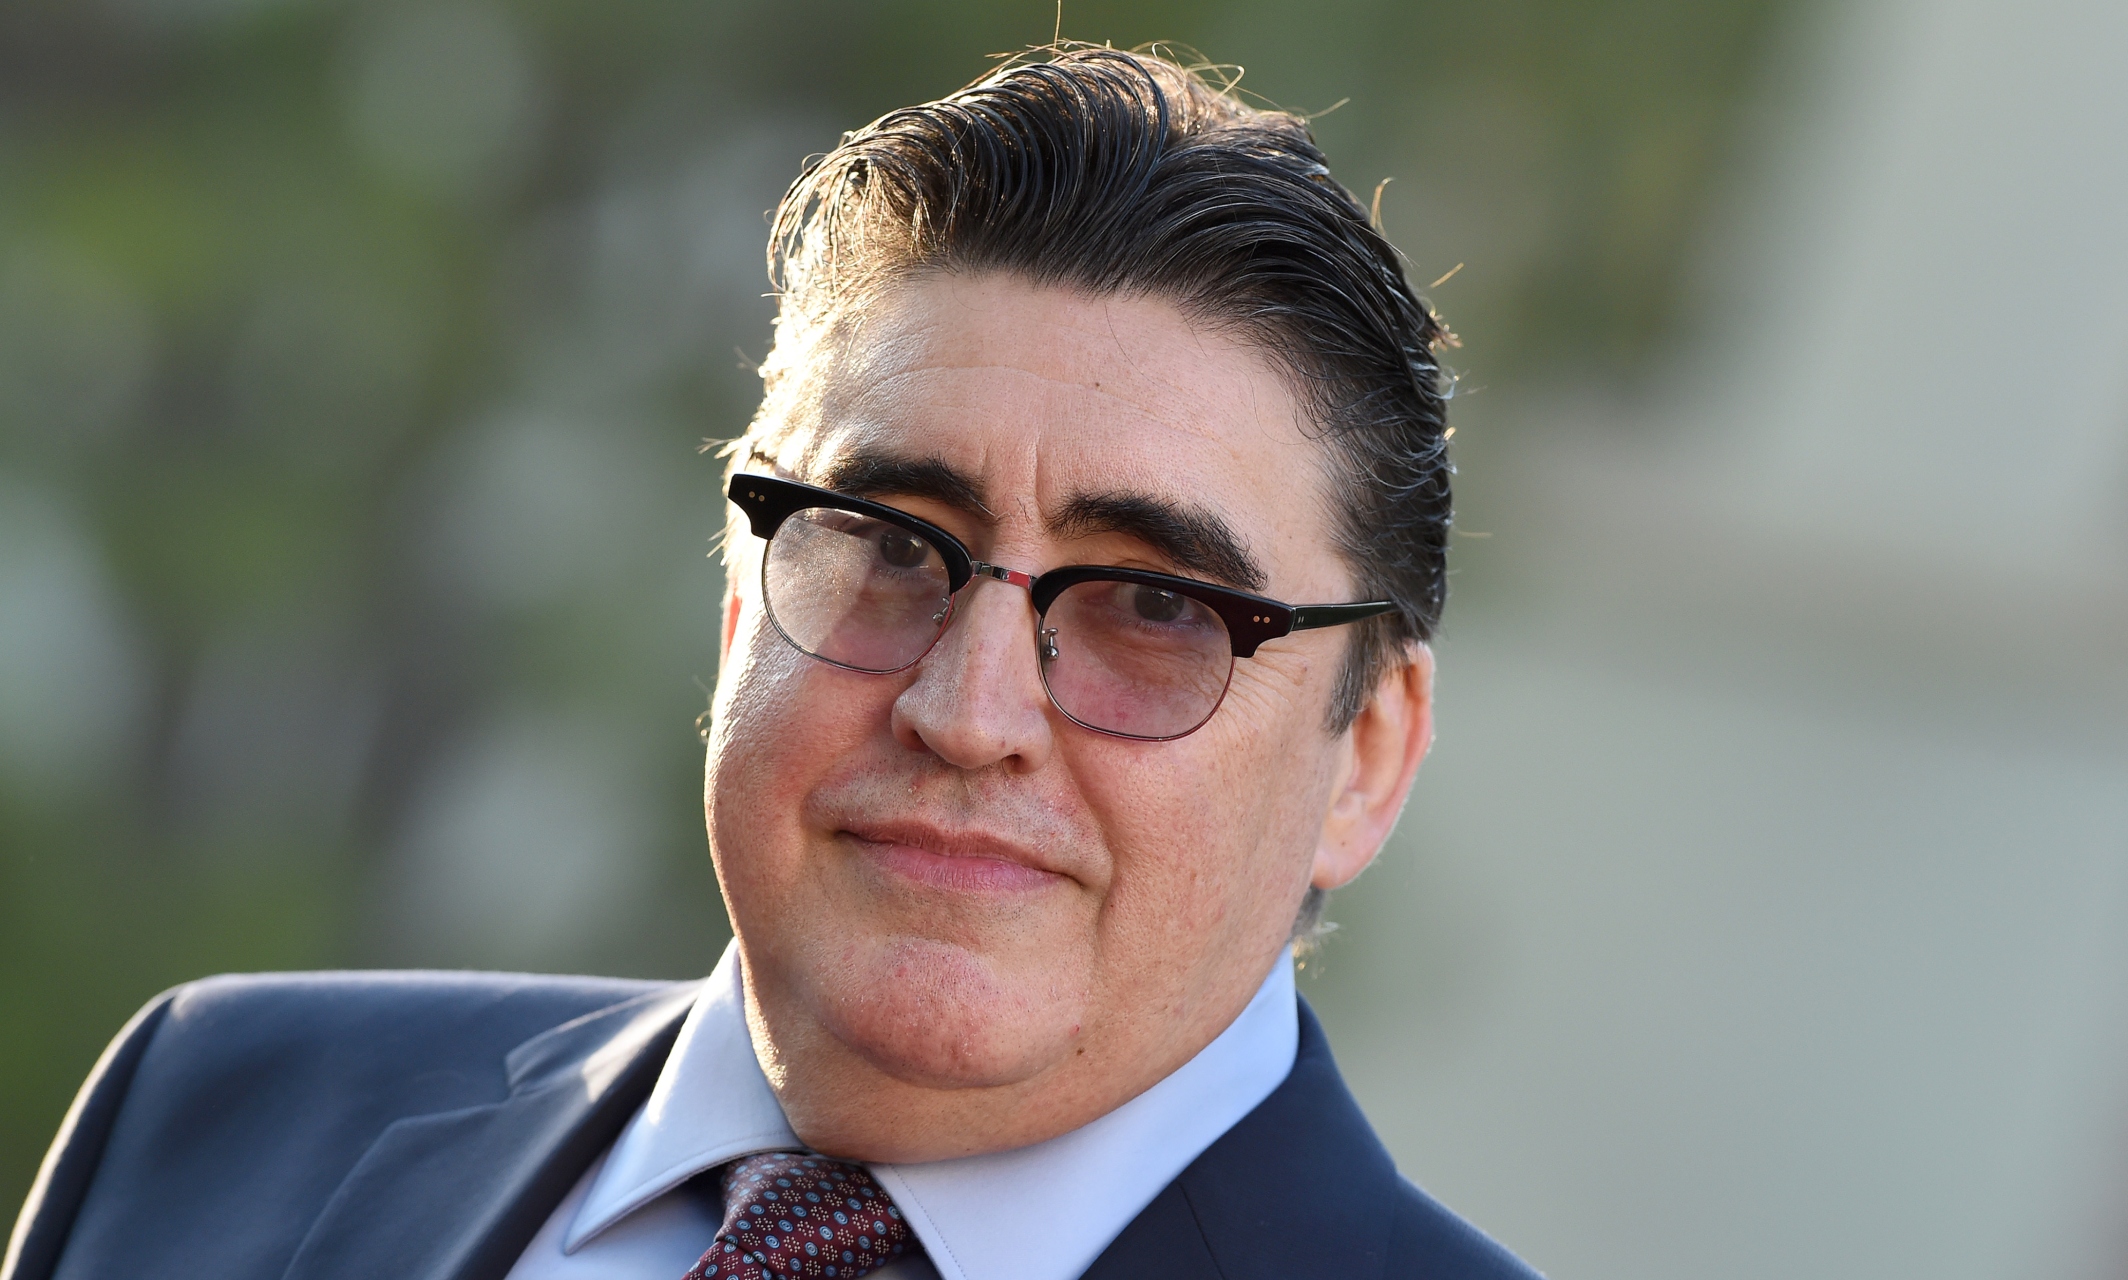 Spider-Man 3': Alfred Molina Reprising Role as Doctor Octopus